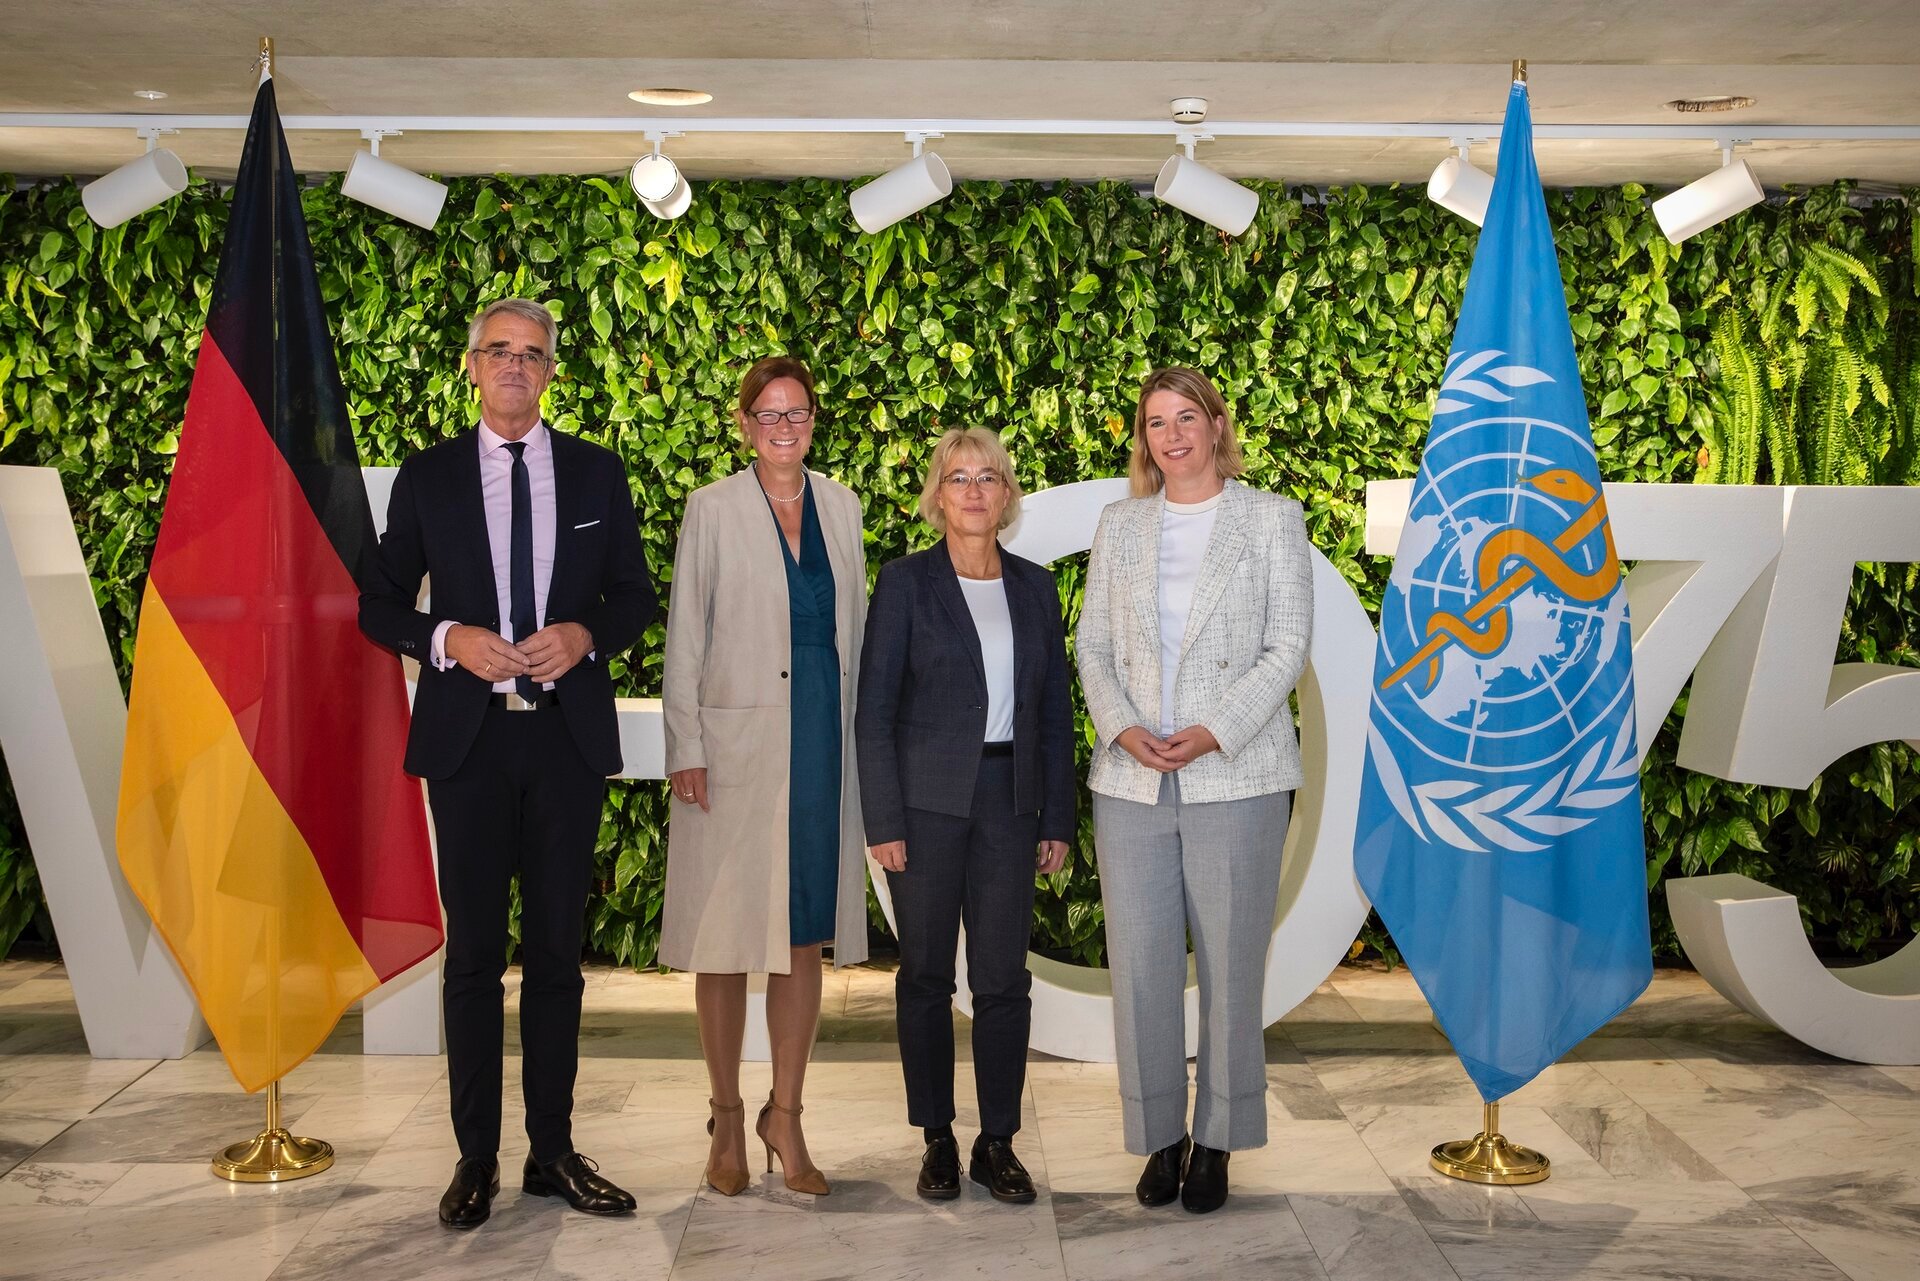 Germany reaffirms its commitment to WHO and key health priorities